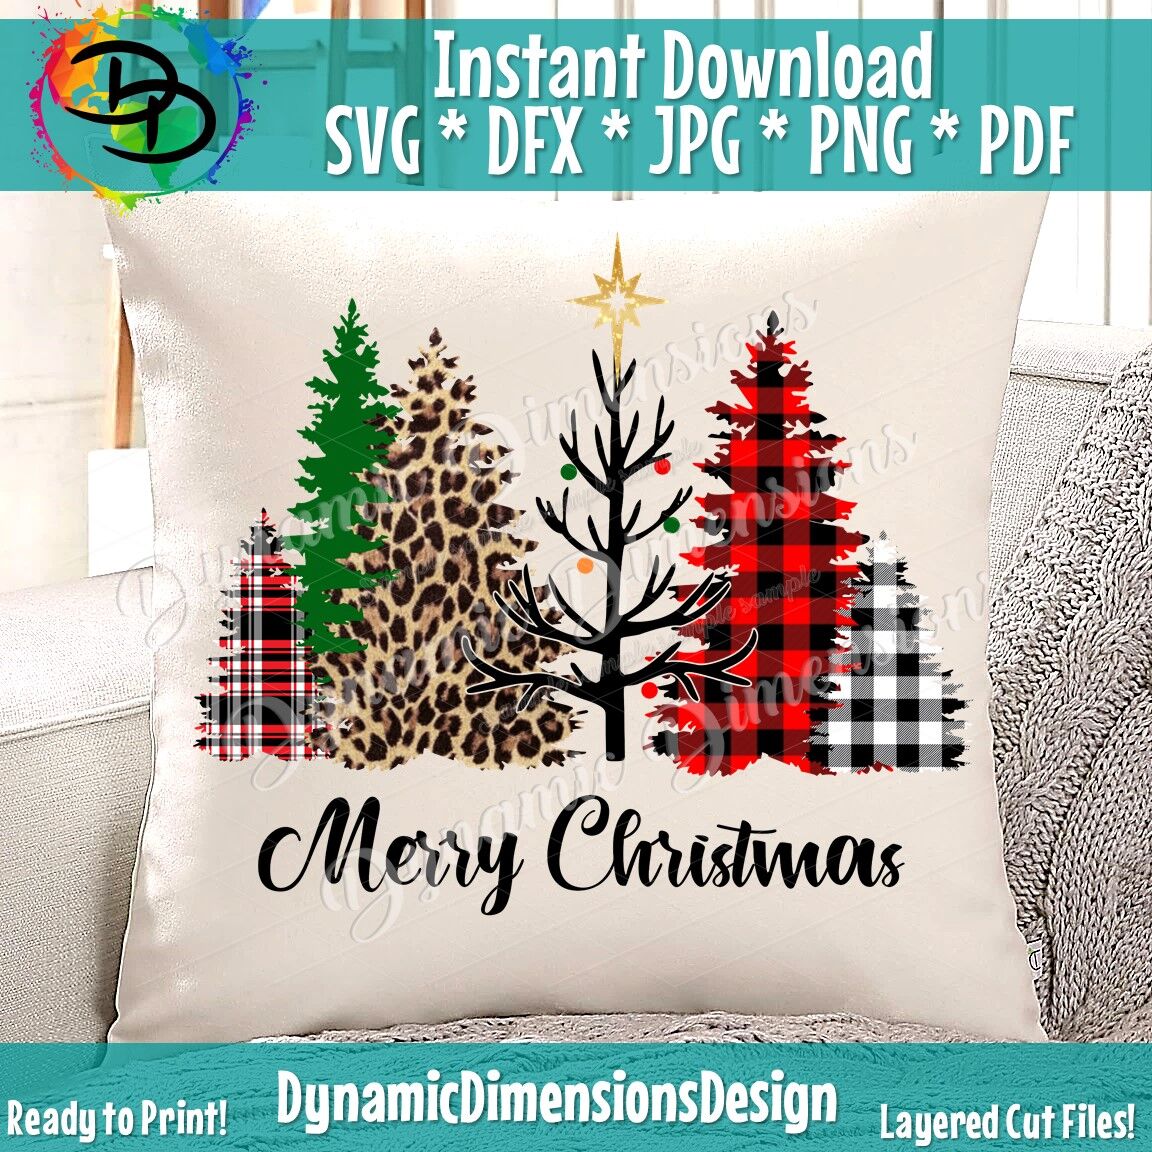 Download Svg To Png Convert Svg Files To Png Online Christmas Tree Rash